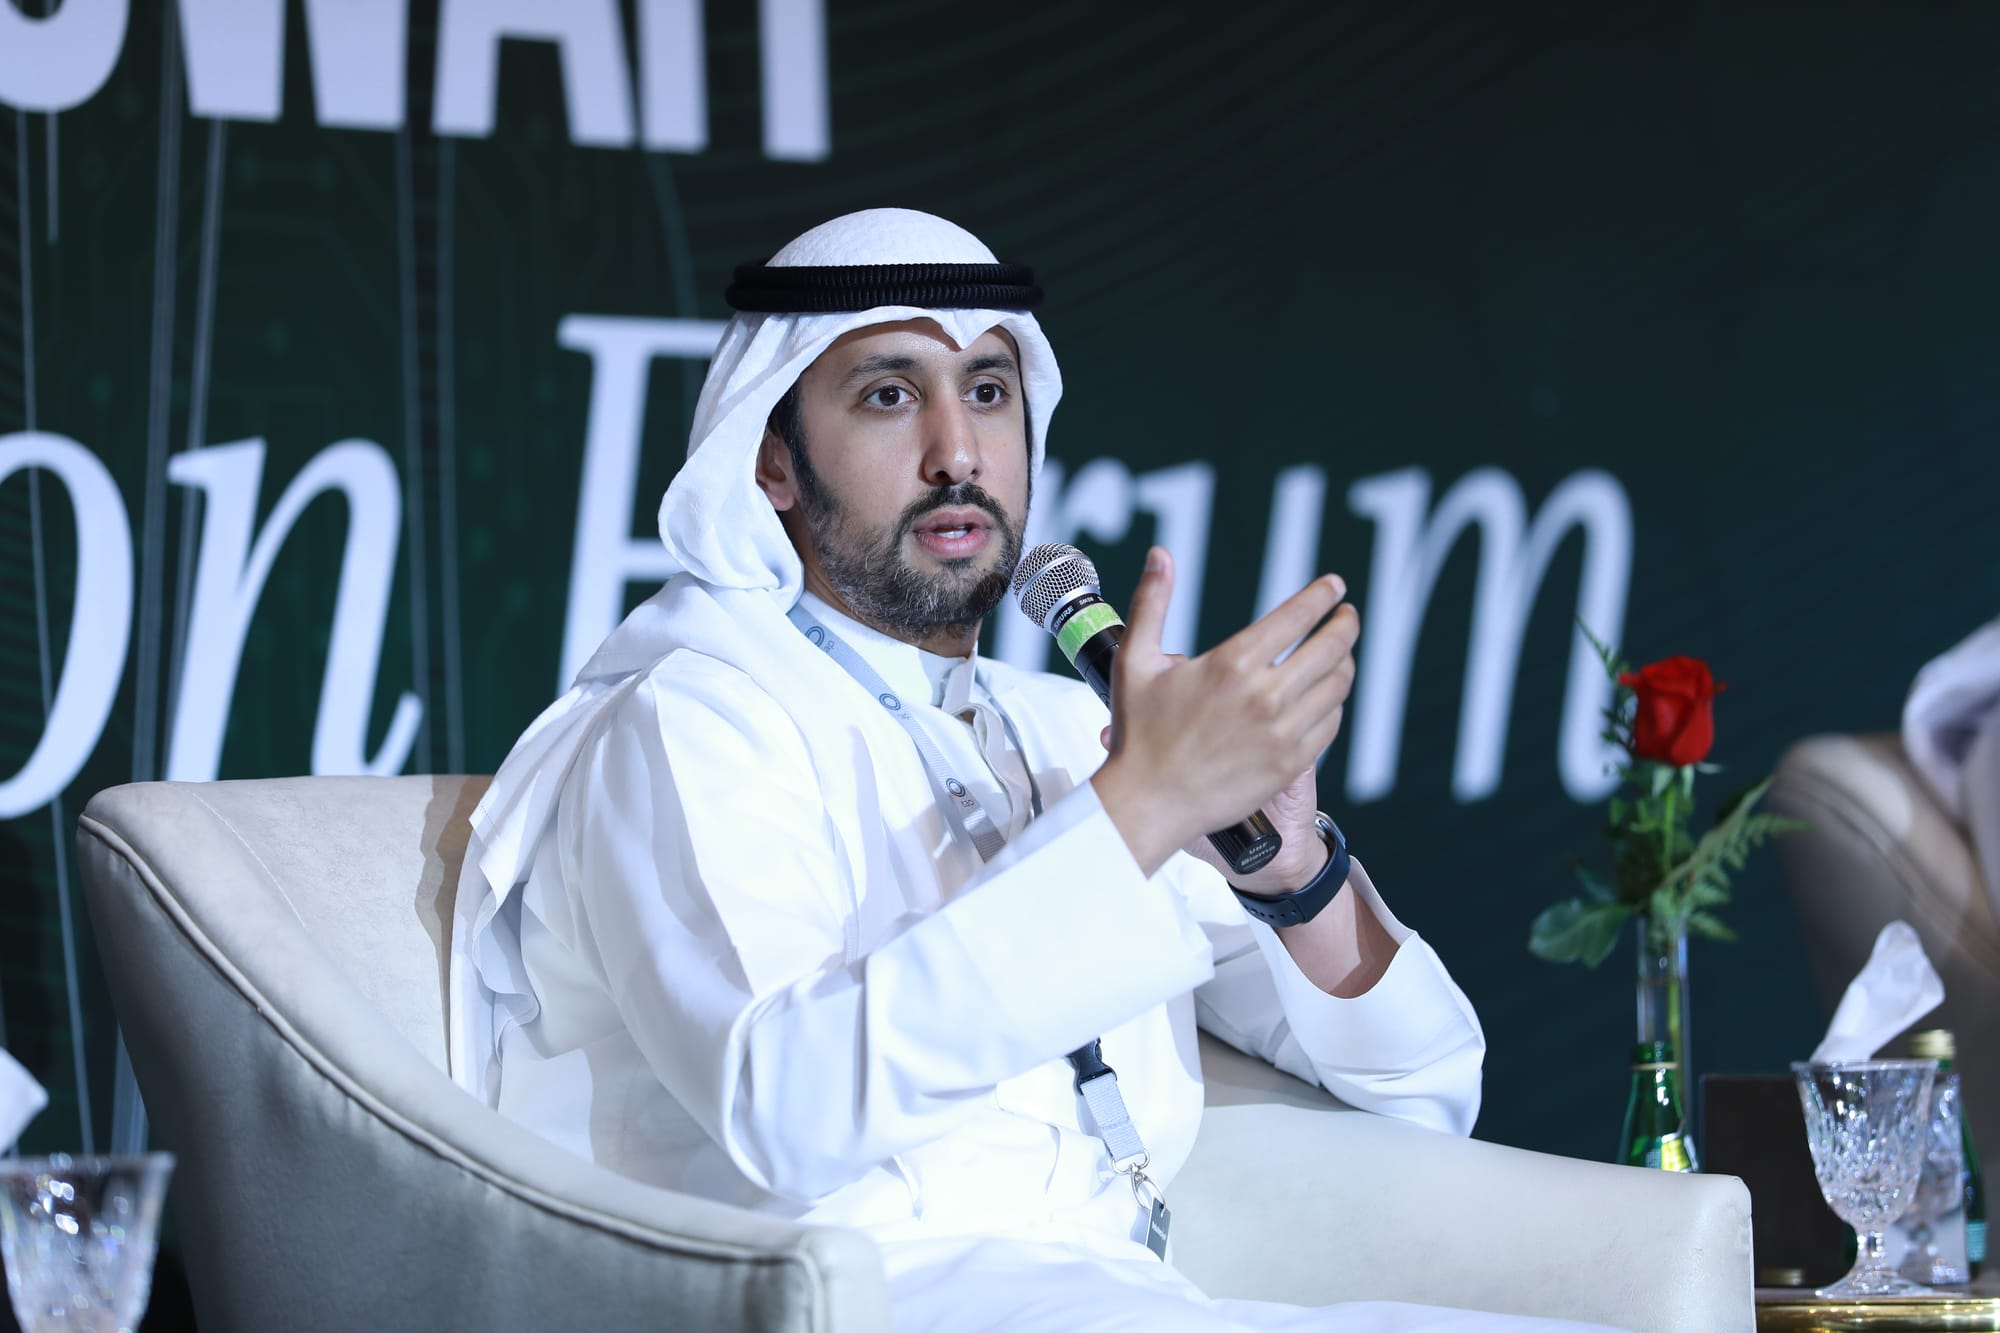 Faisal Alharoun, Managing Director of Tap Payments, Kuwait